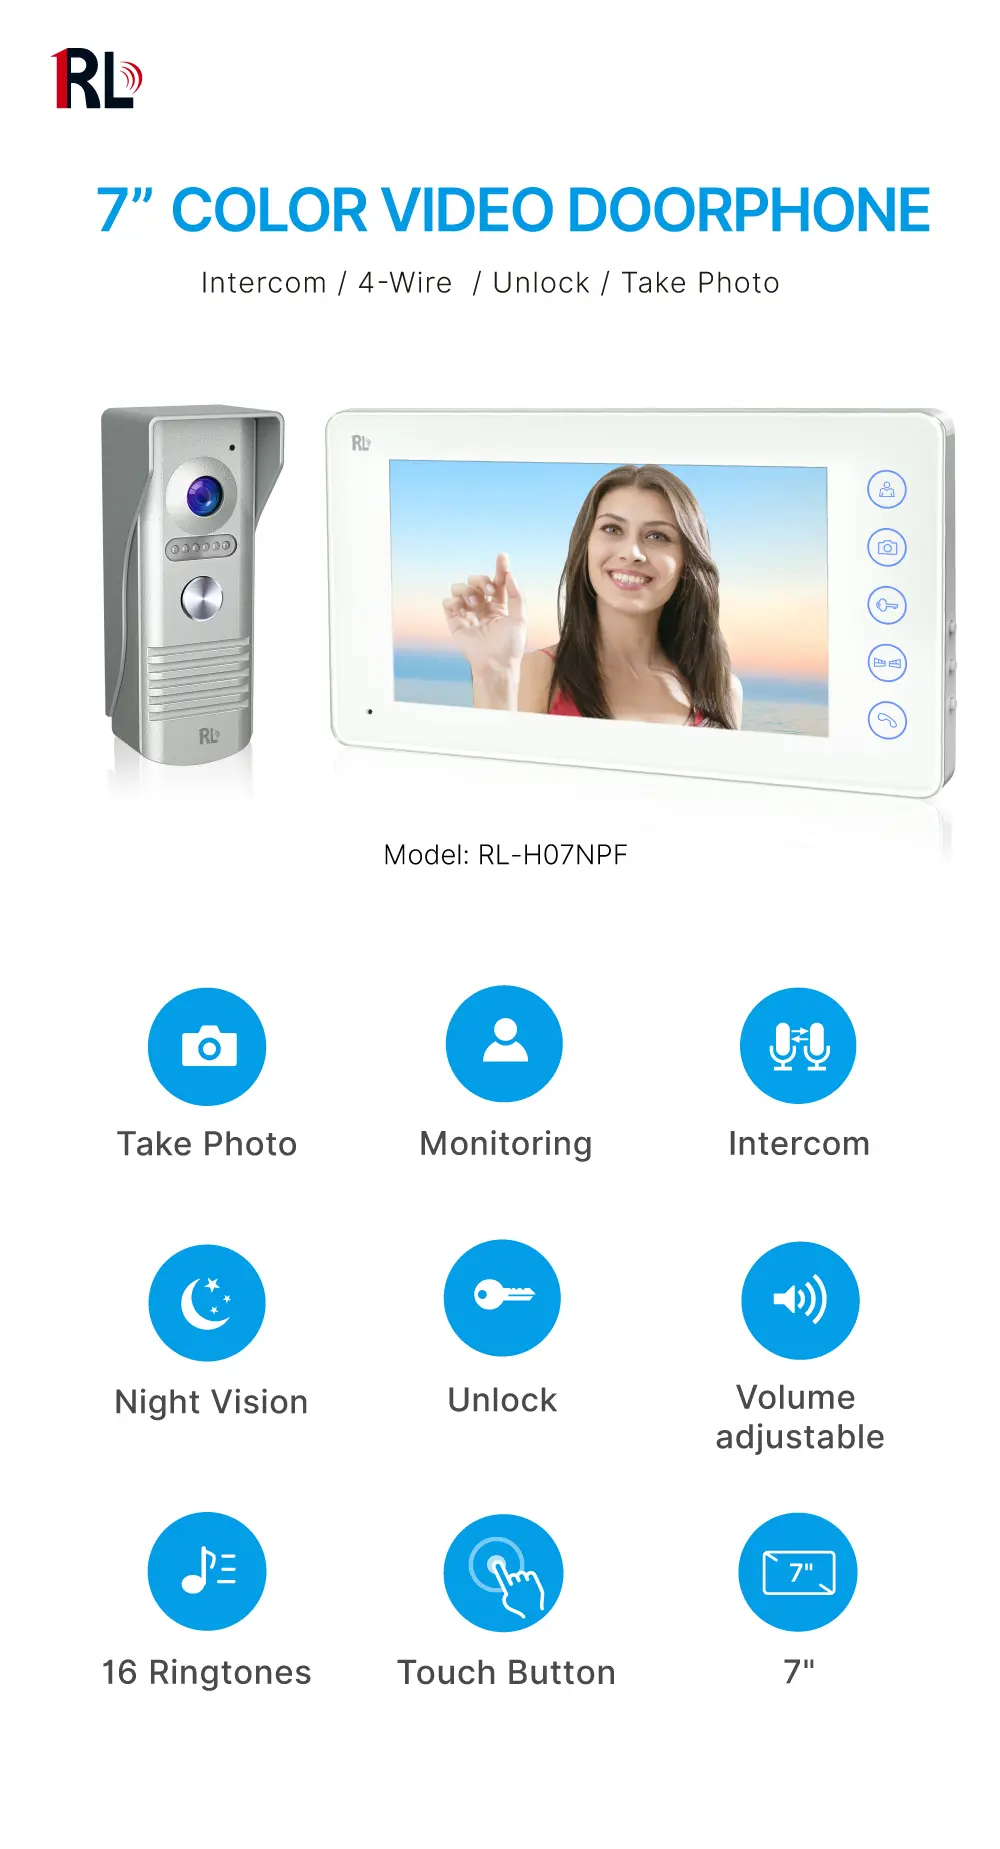  ●Model # RL-H07NPF ●Tuya remote control from smart phone. ●Easy 4 wires connection, DIY. ●7 inch TFT screen, 800*480 resolution. ●Touch button monitor, white and black colors for option. ●Receive video call and intercom via monitor. _01